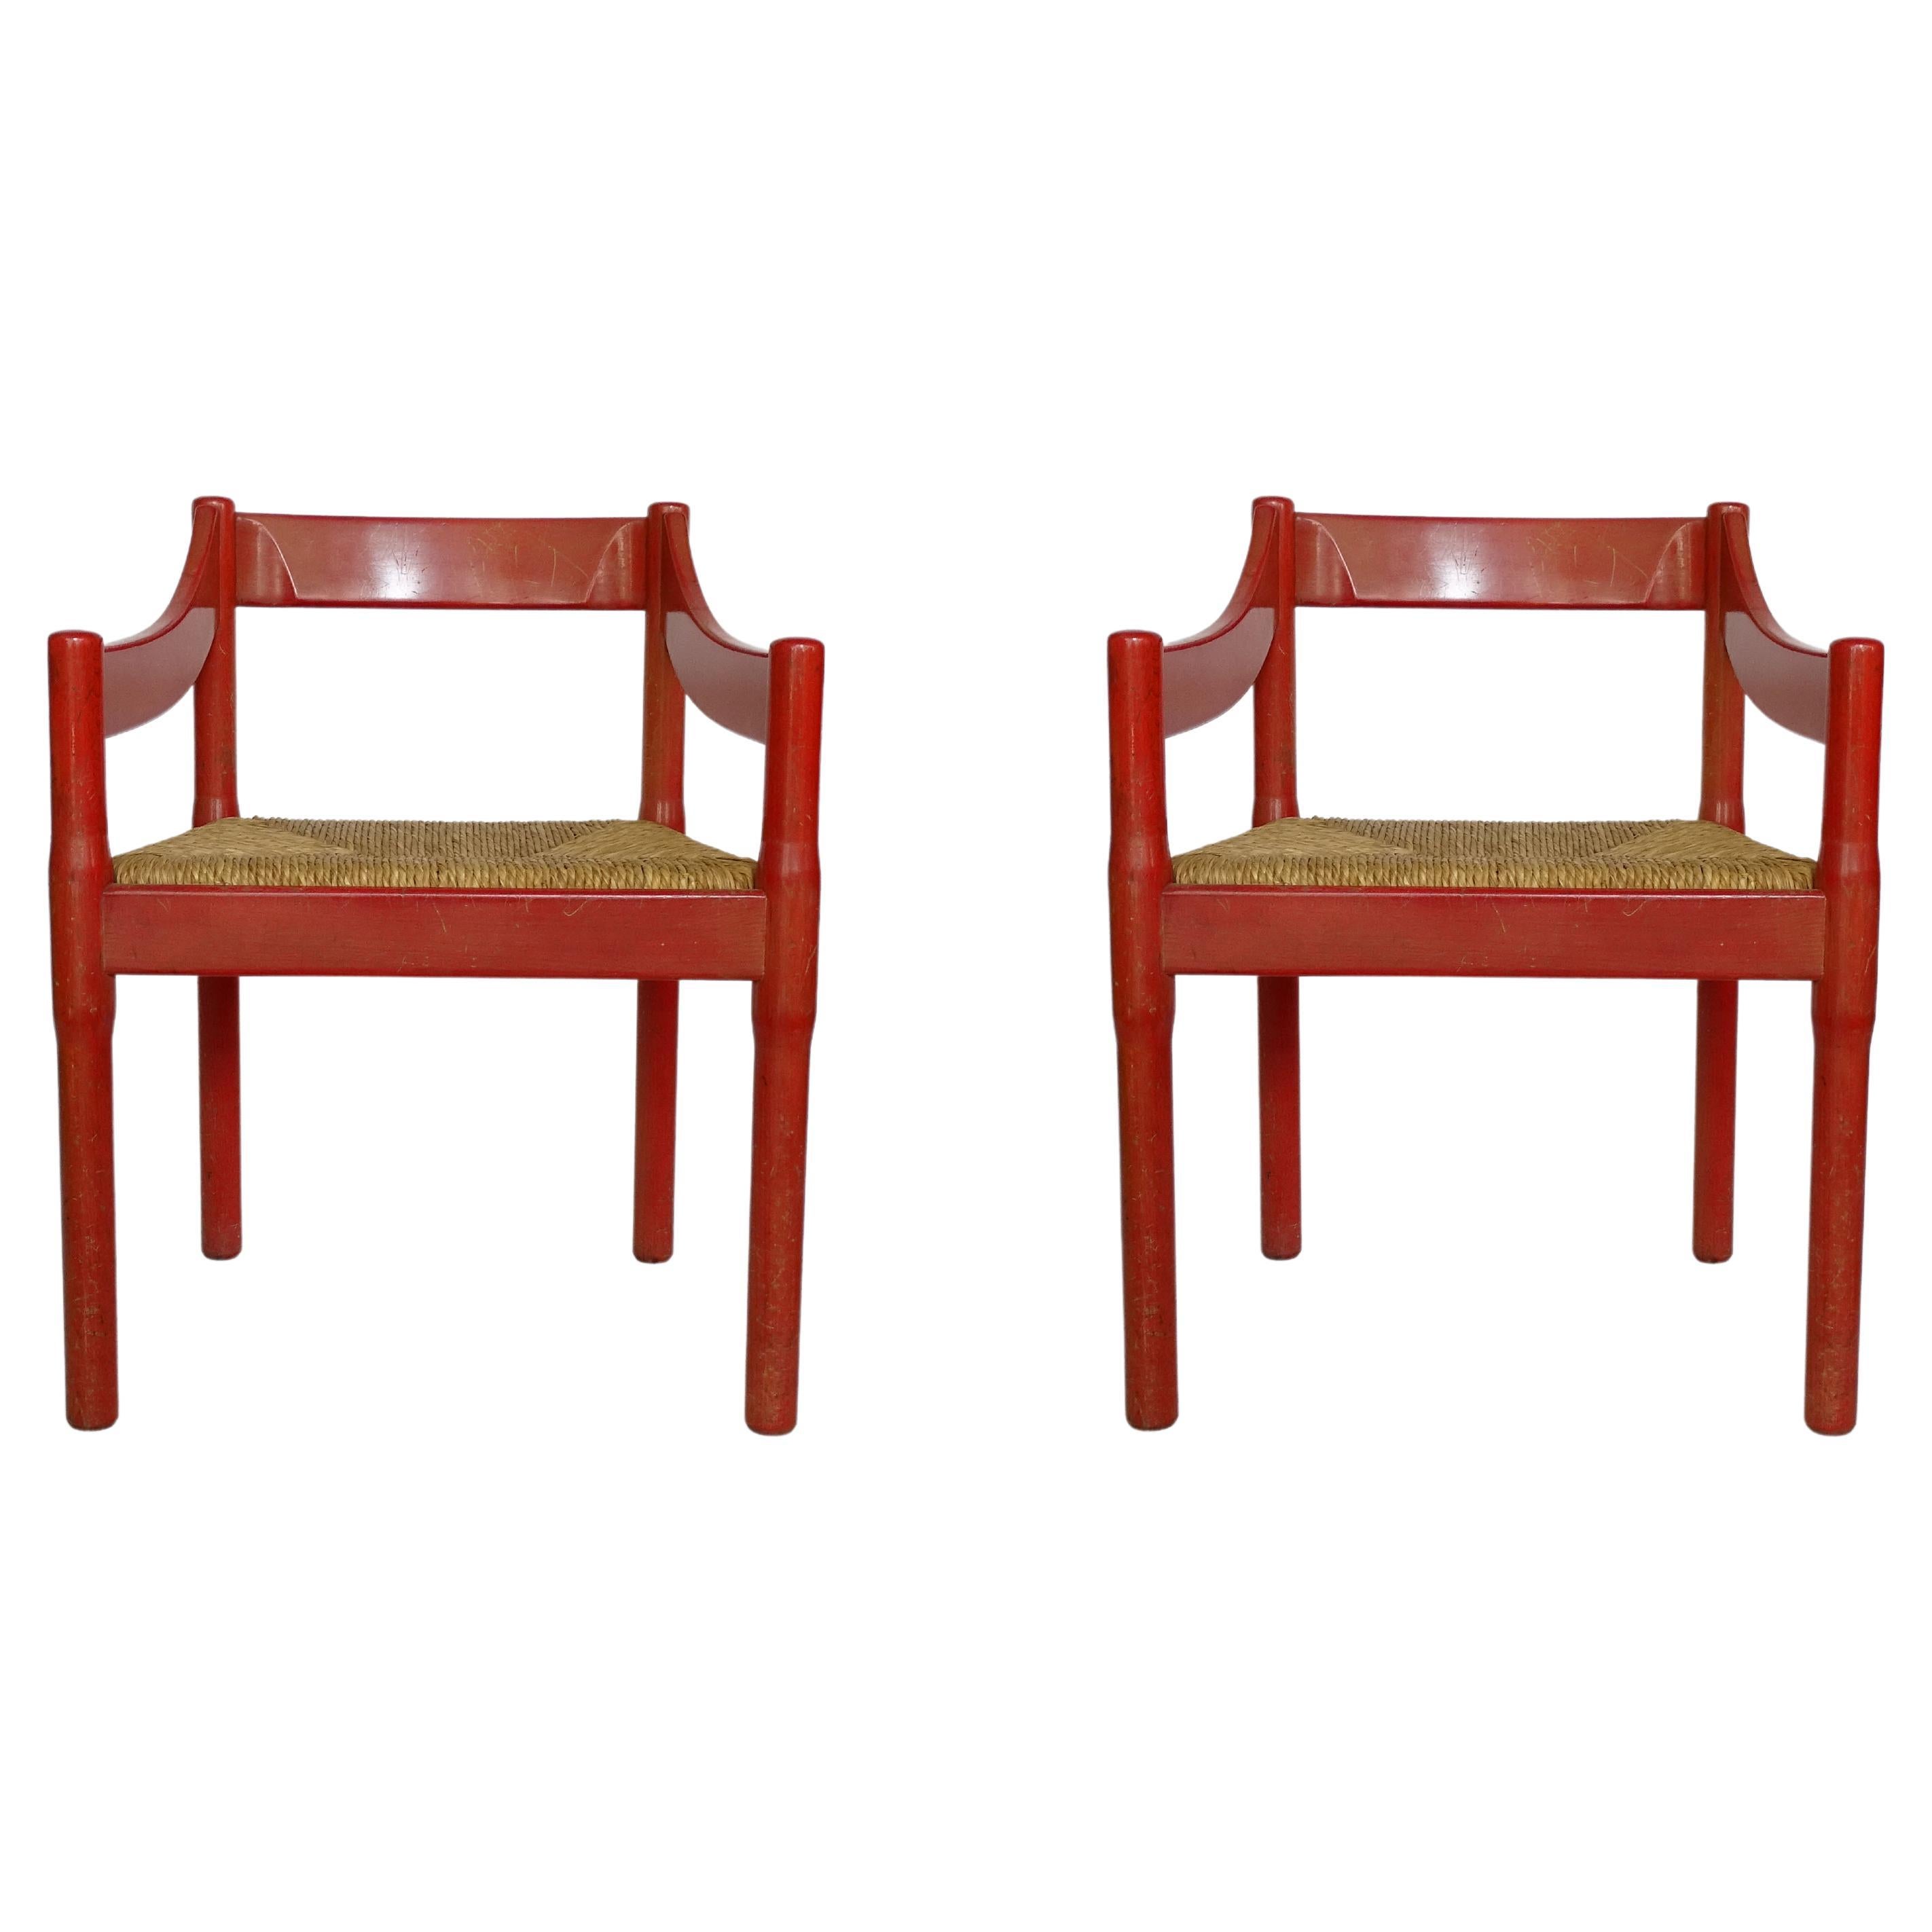 Vico Magistretti Pair of Red Carimate Armchairs for Cassina, Italy, 1961